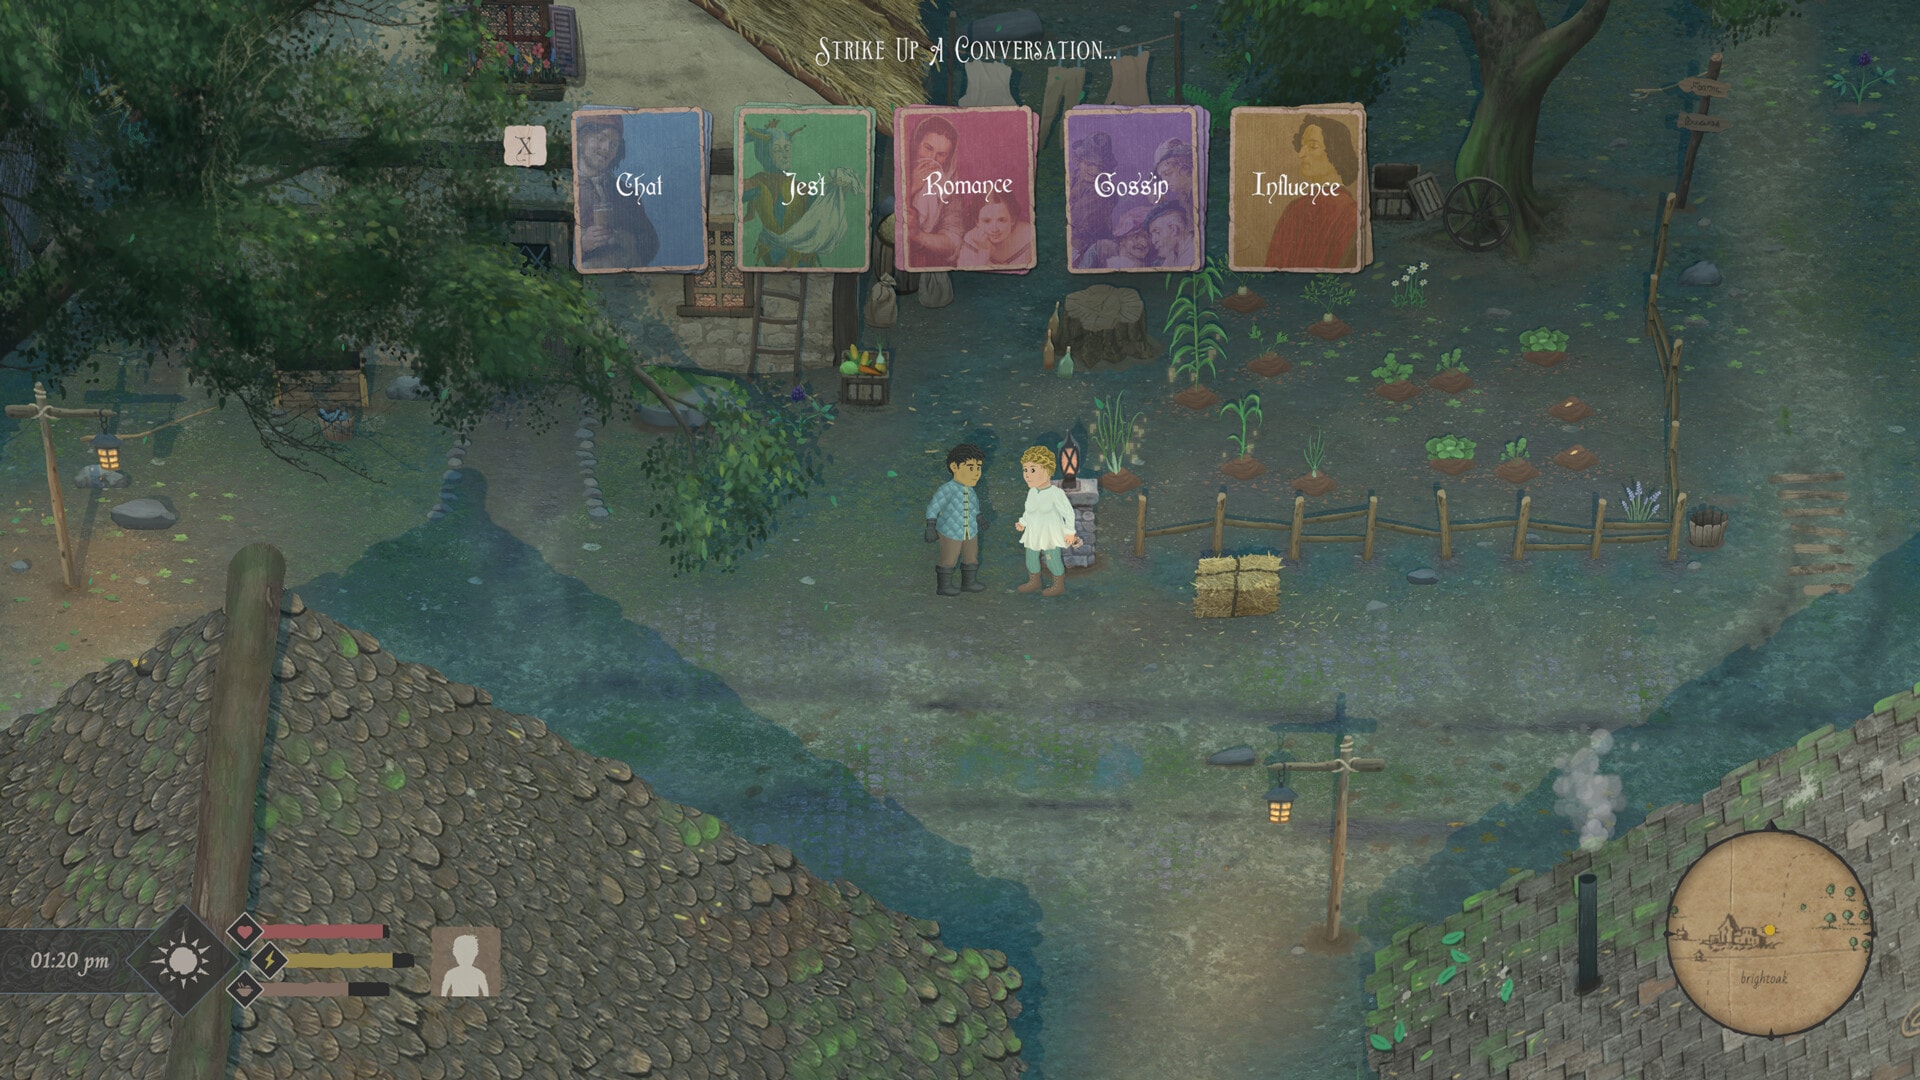 Screenshot from Mistwood of the player character talking with an NPC showing the multiple options for conversation topics: chat, jest, romance, gossip, influence